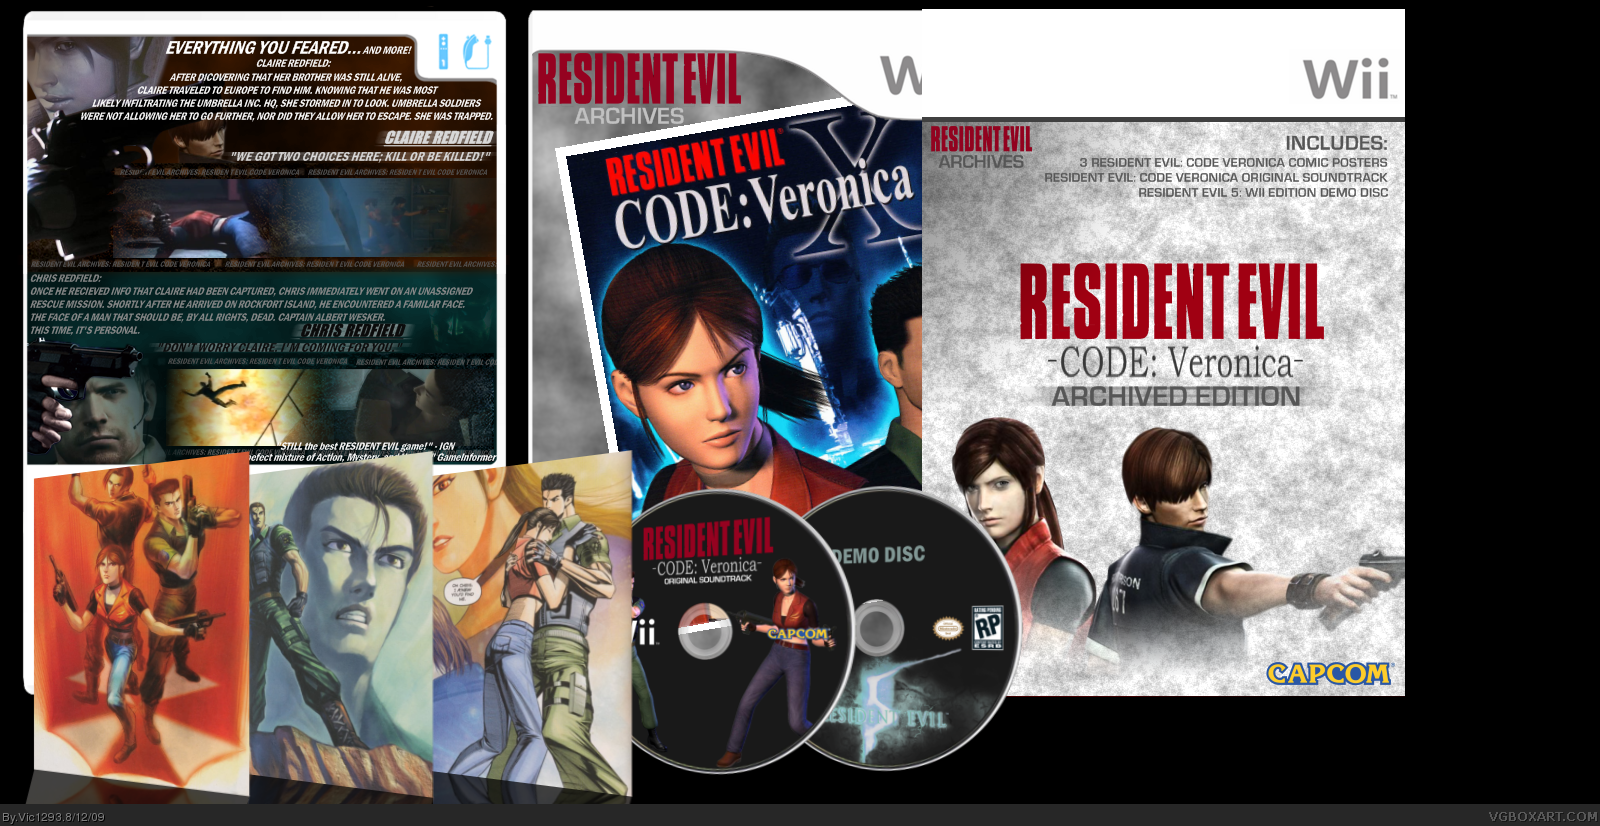 Resident Evil Archives: CODE: Veronica box cover